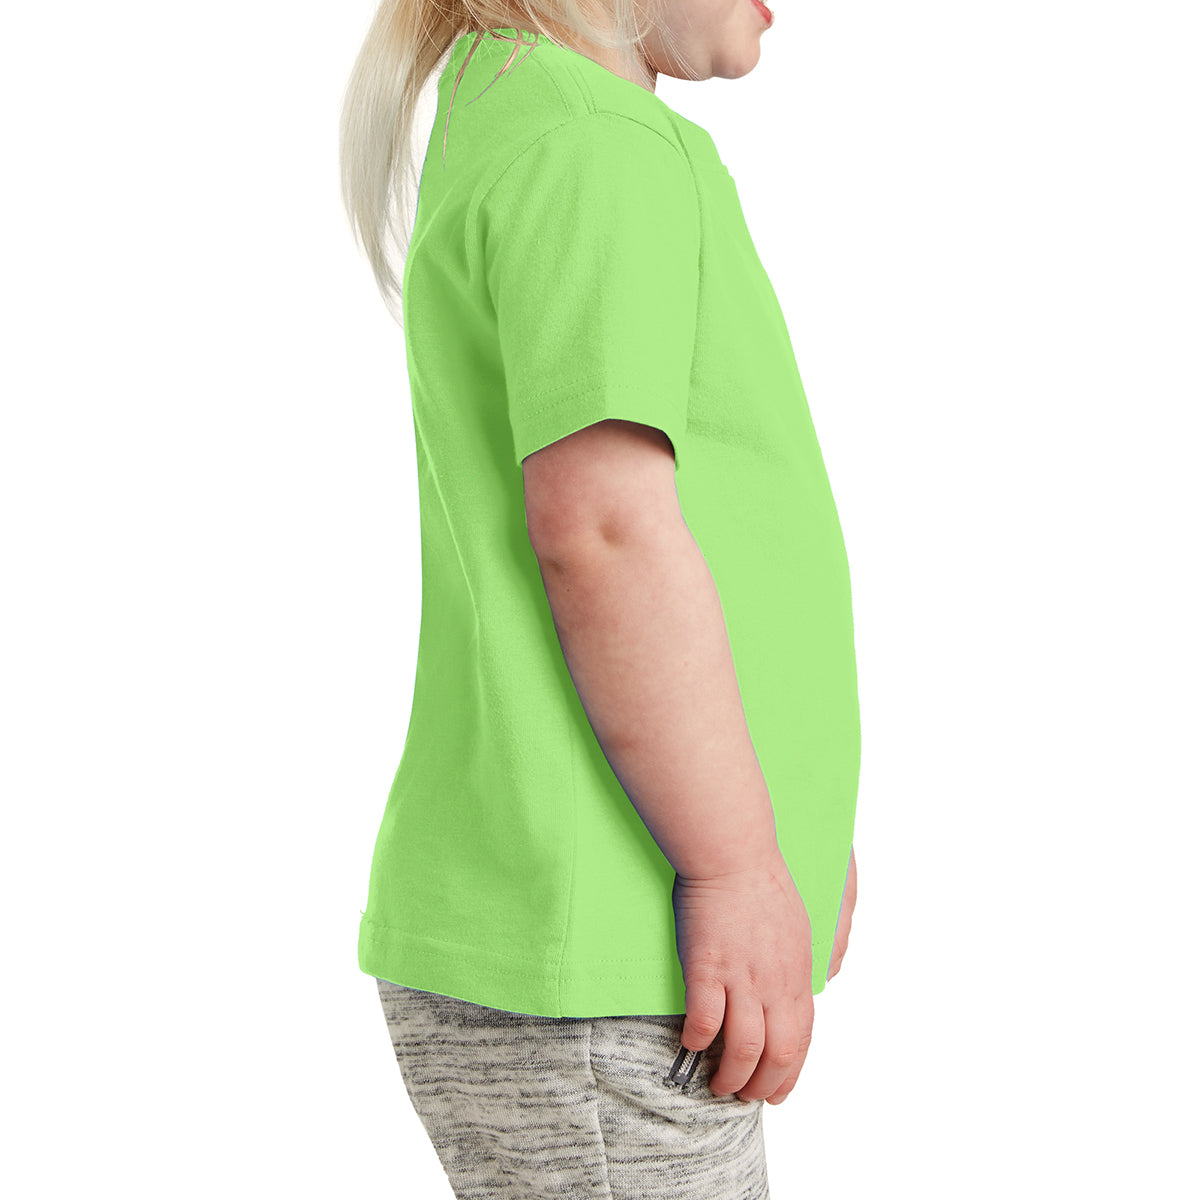 Toddler Fine Jersey Tee - Key Lime